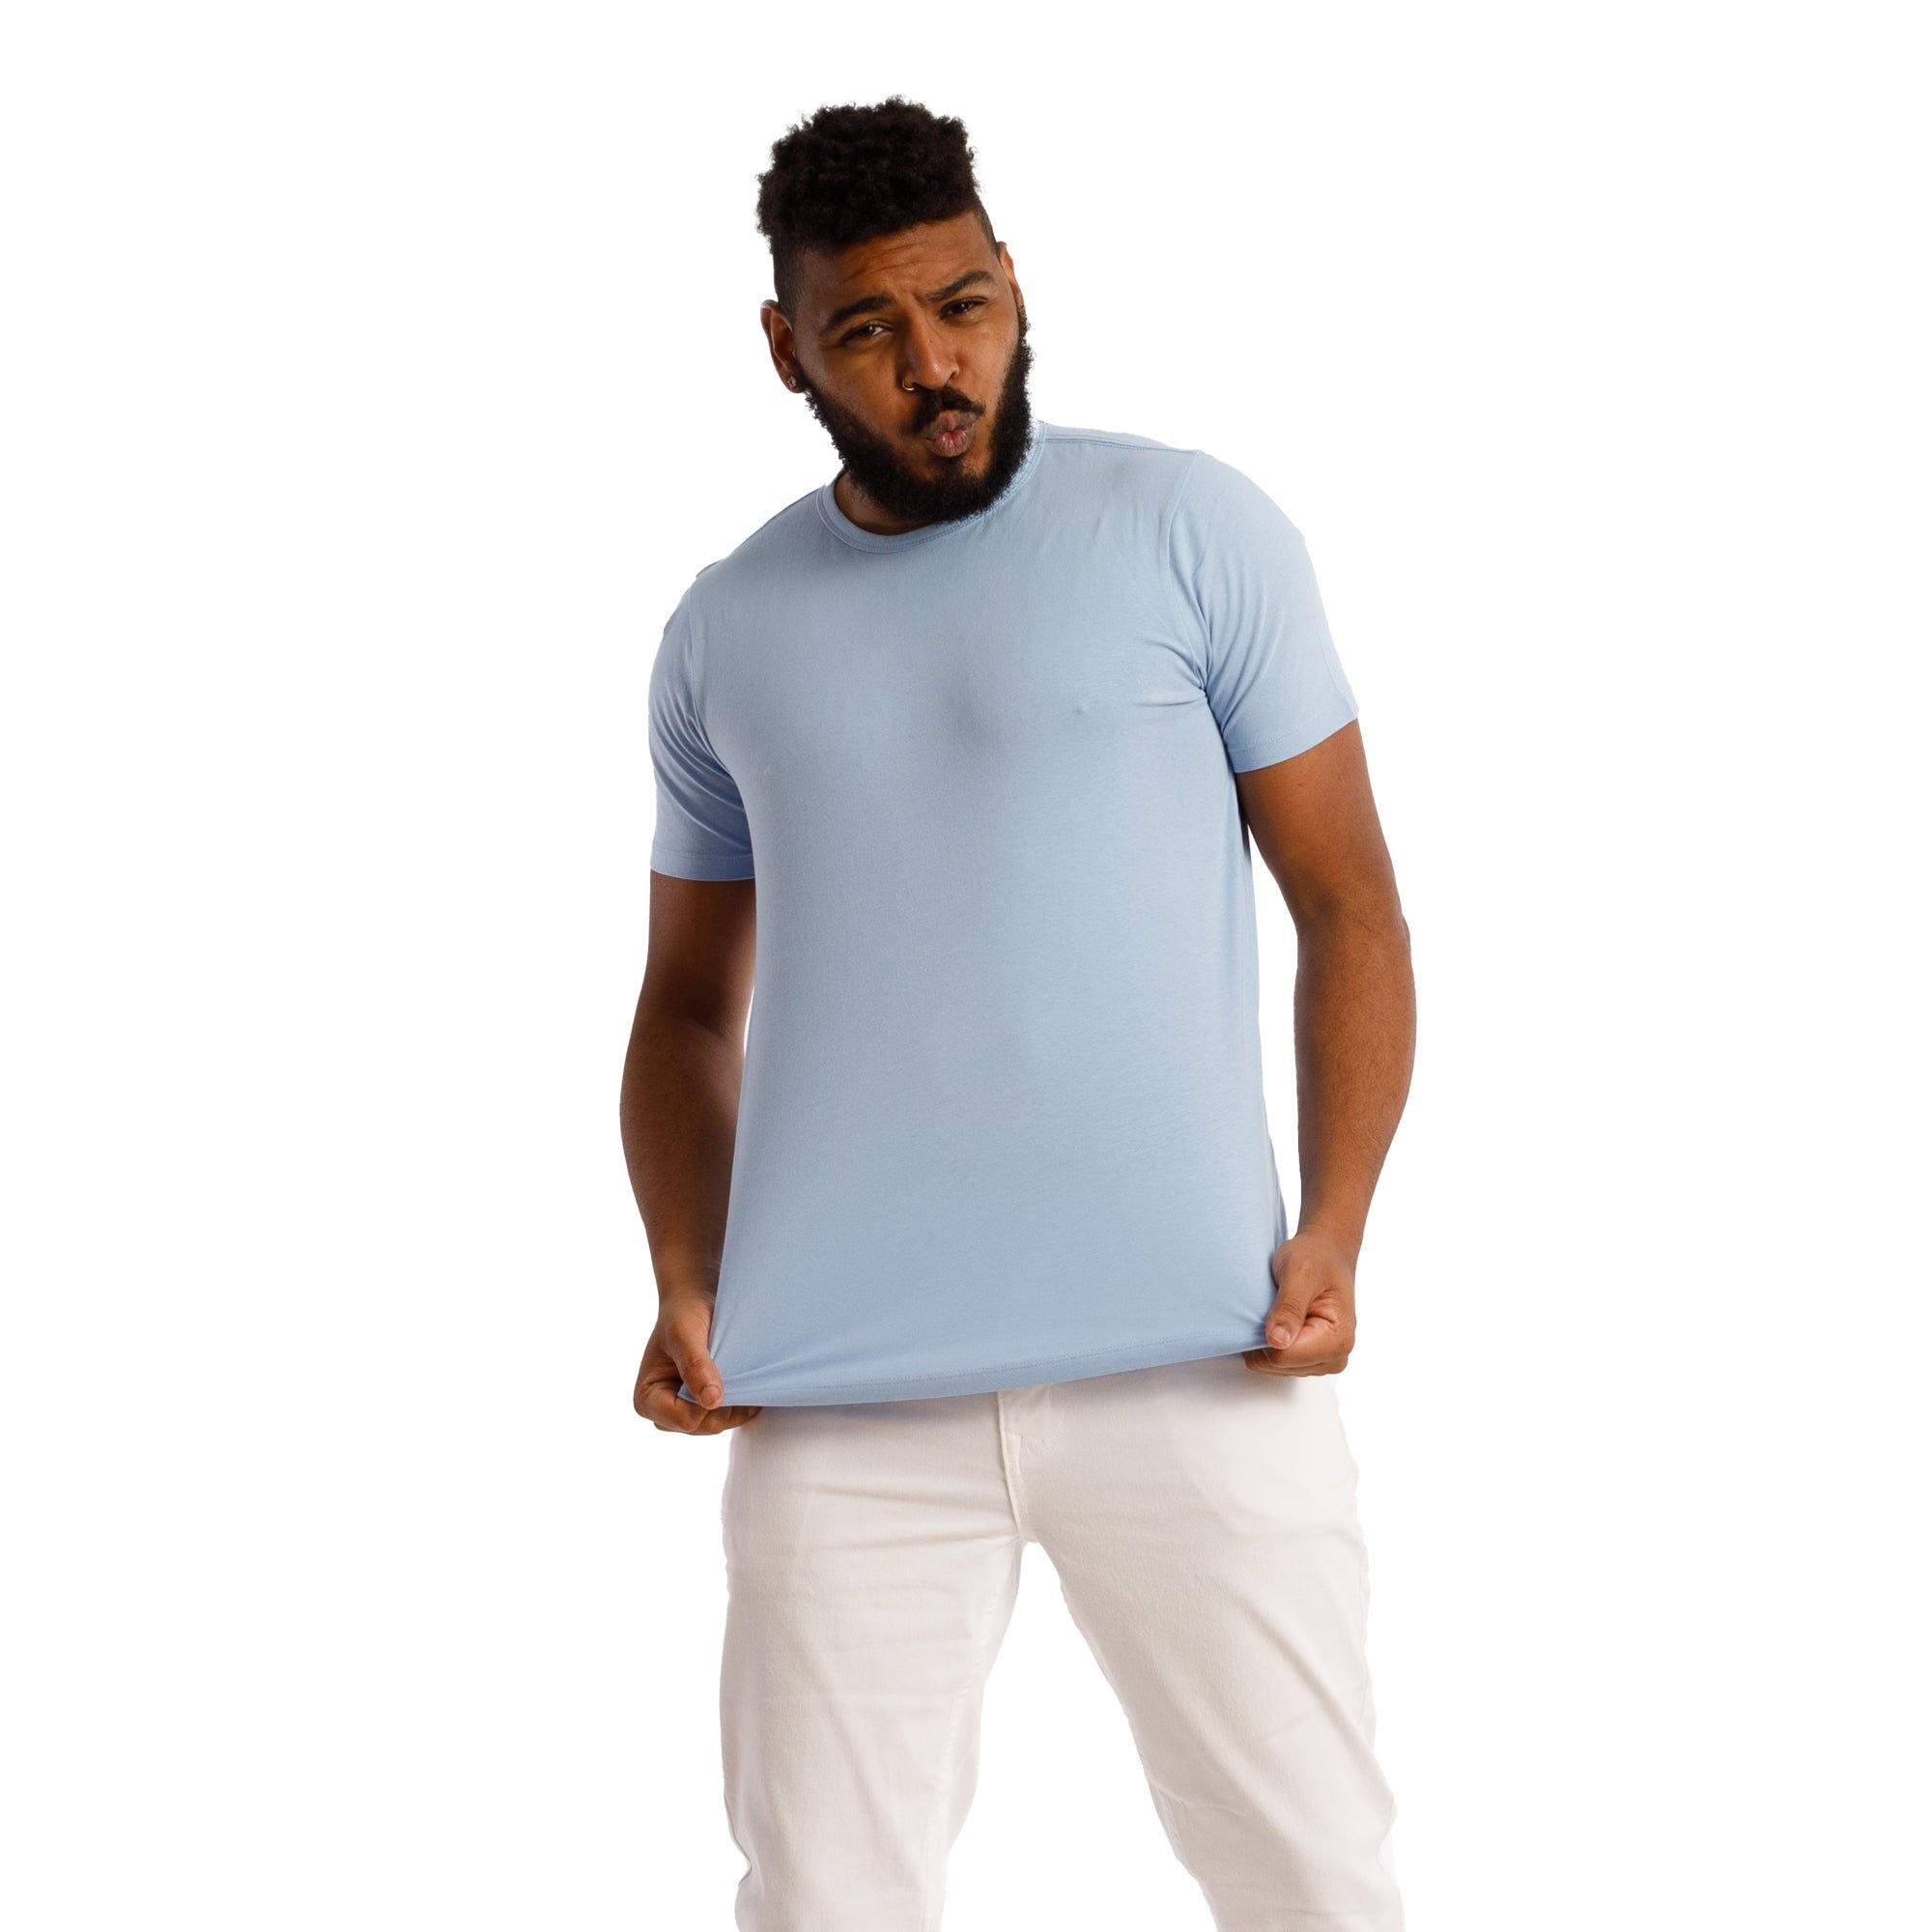 Man in white and blue crew neck t-shirt wearing blue and white